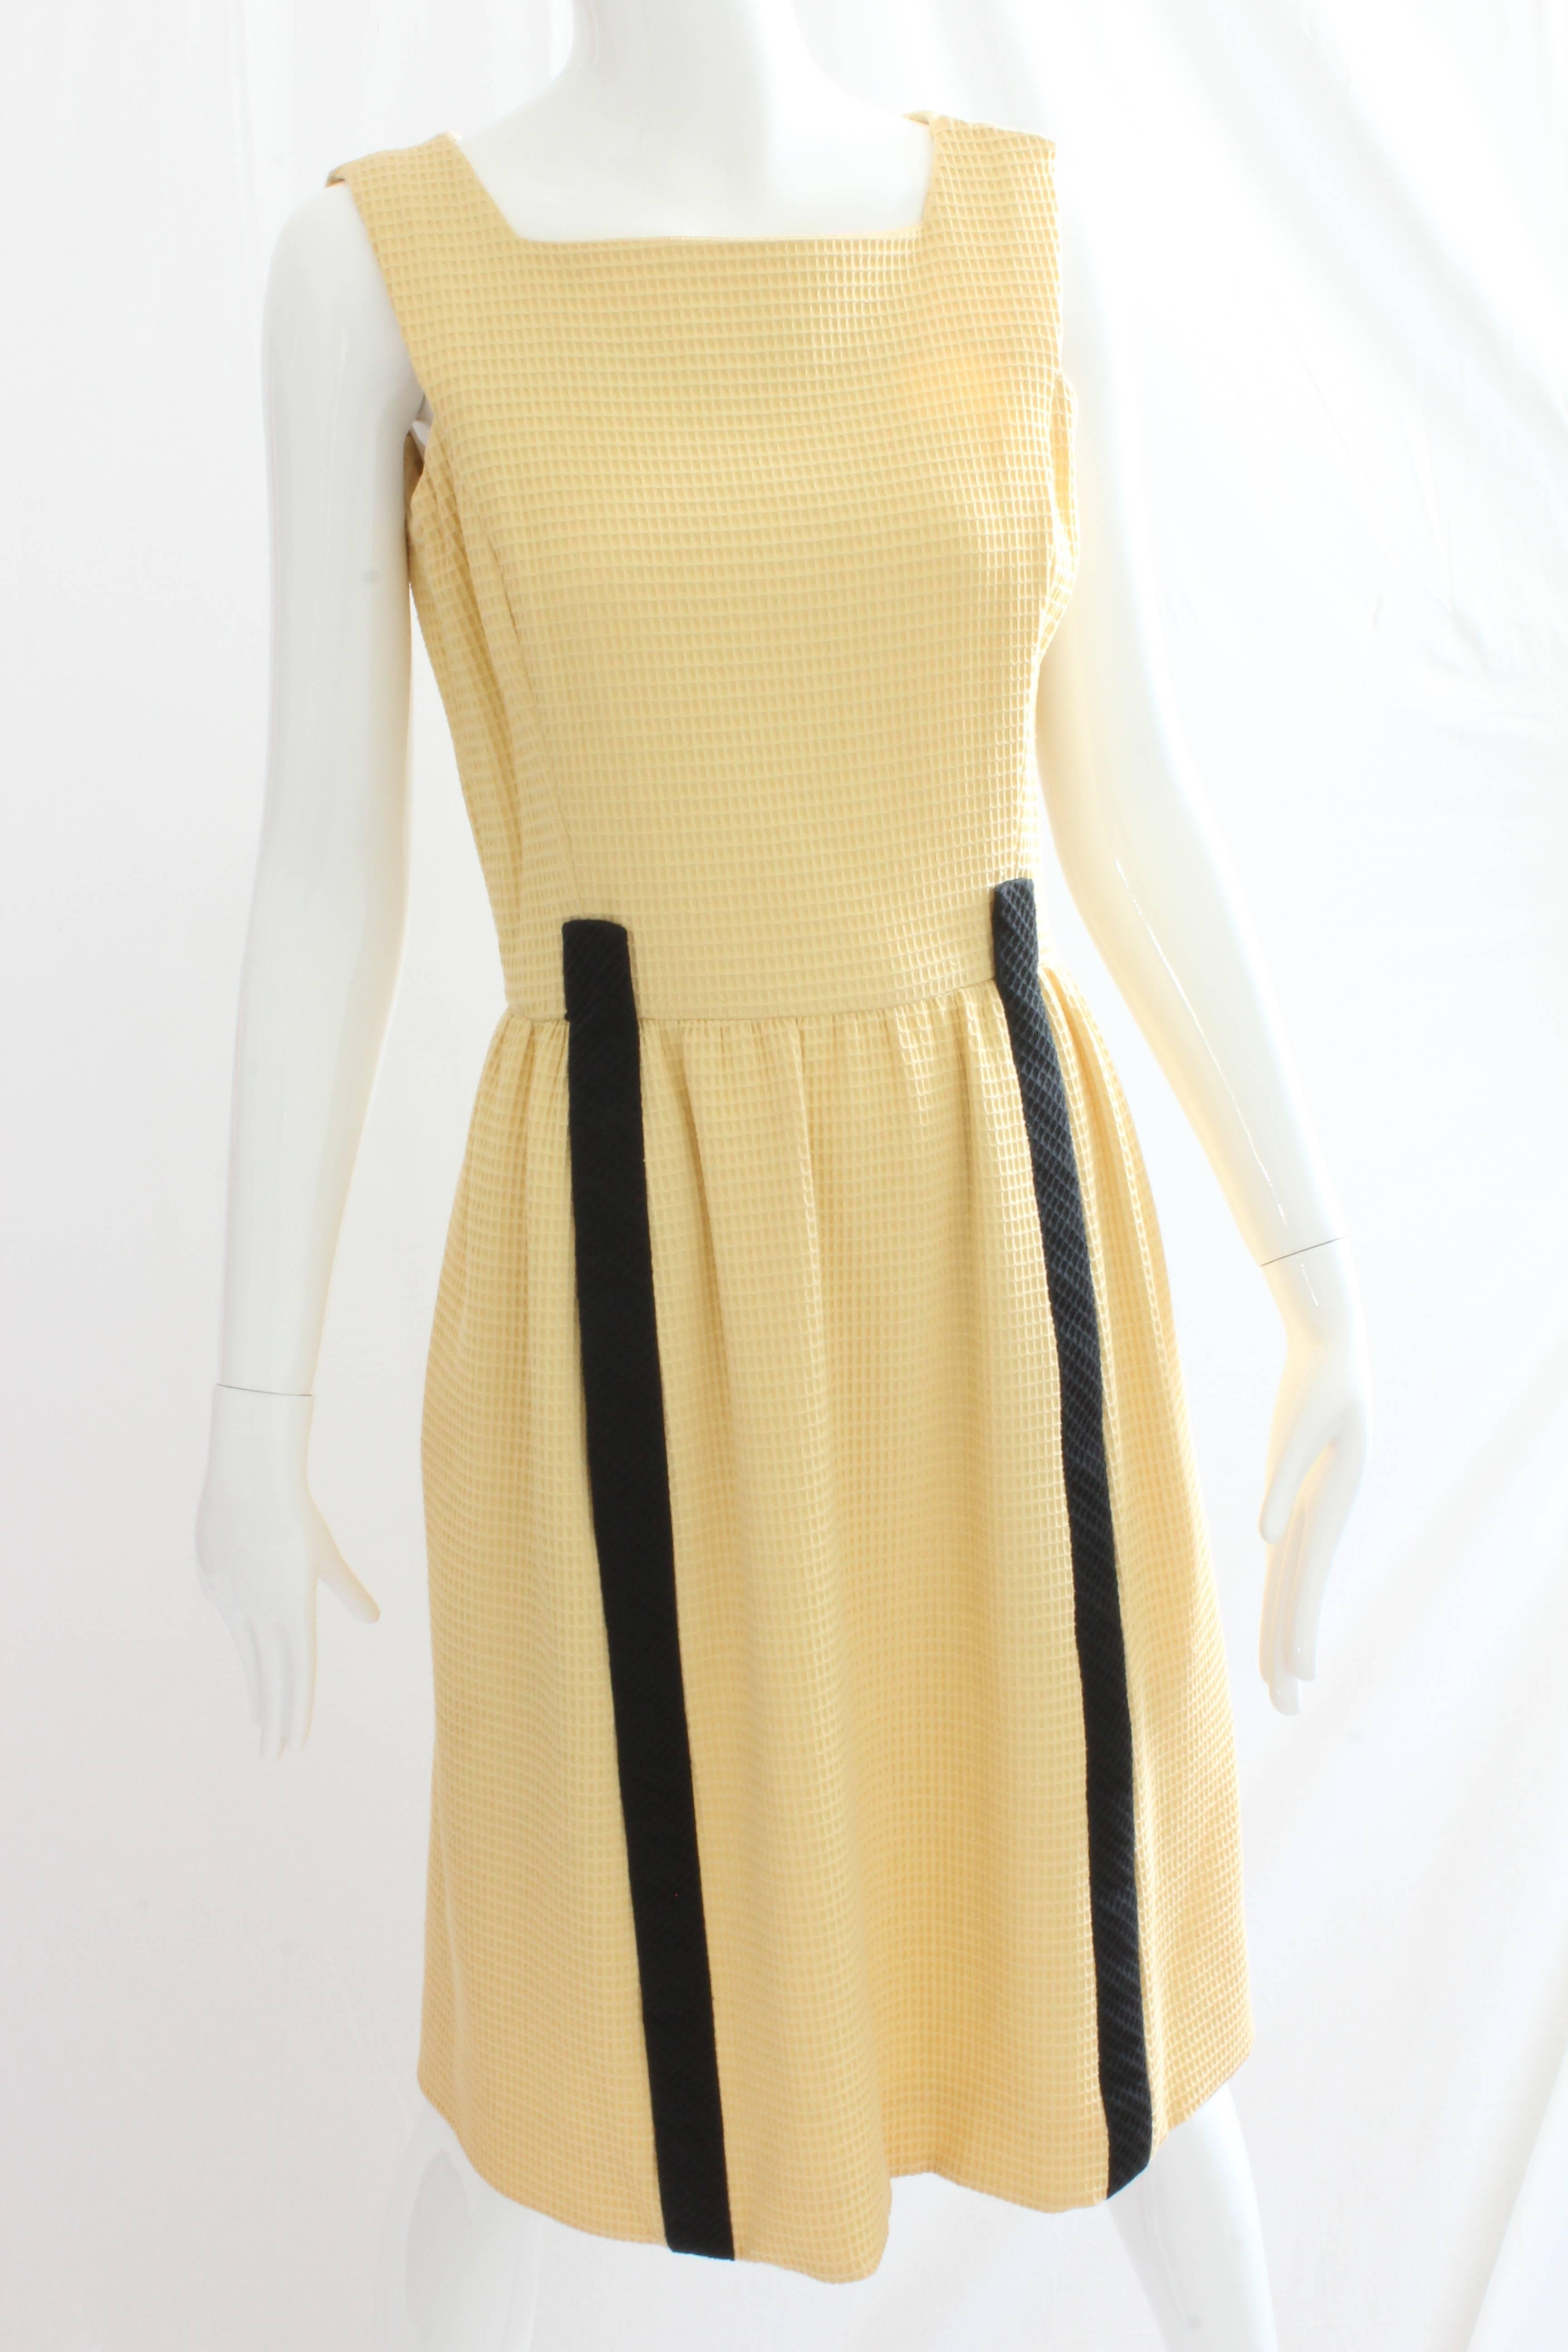 60s Chester Weinberg Jacket and Dress Ensemble 2pc Set Yellow Honeycomb Fabric S 1